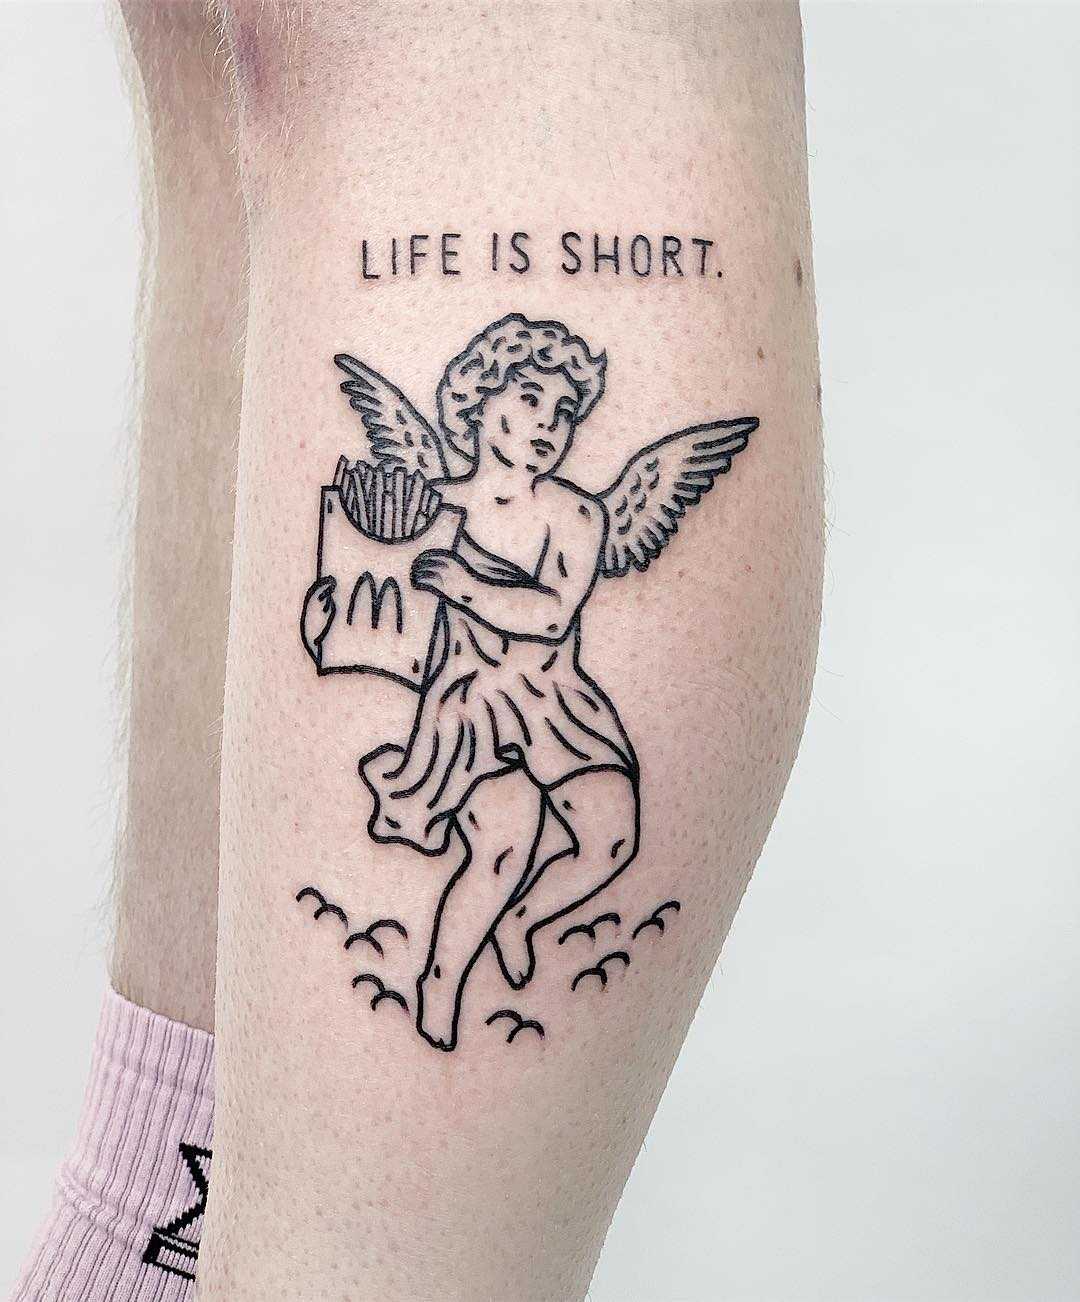 Life is short tattoo by @themagicrosa